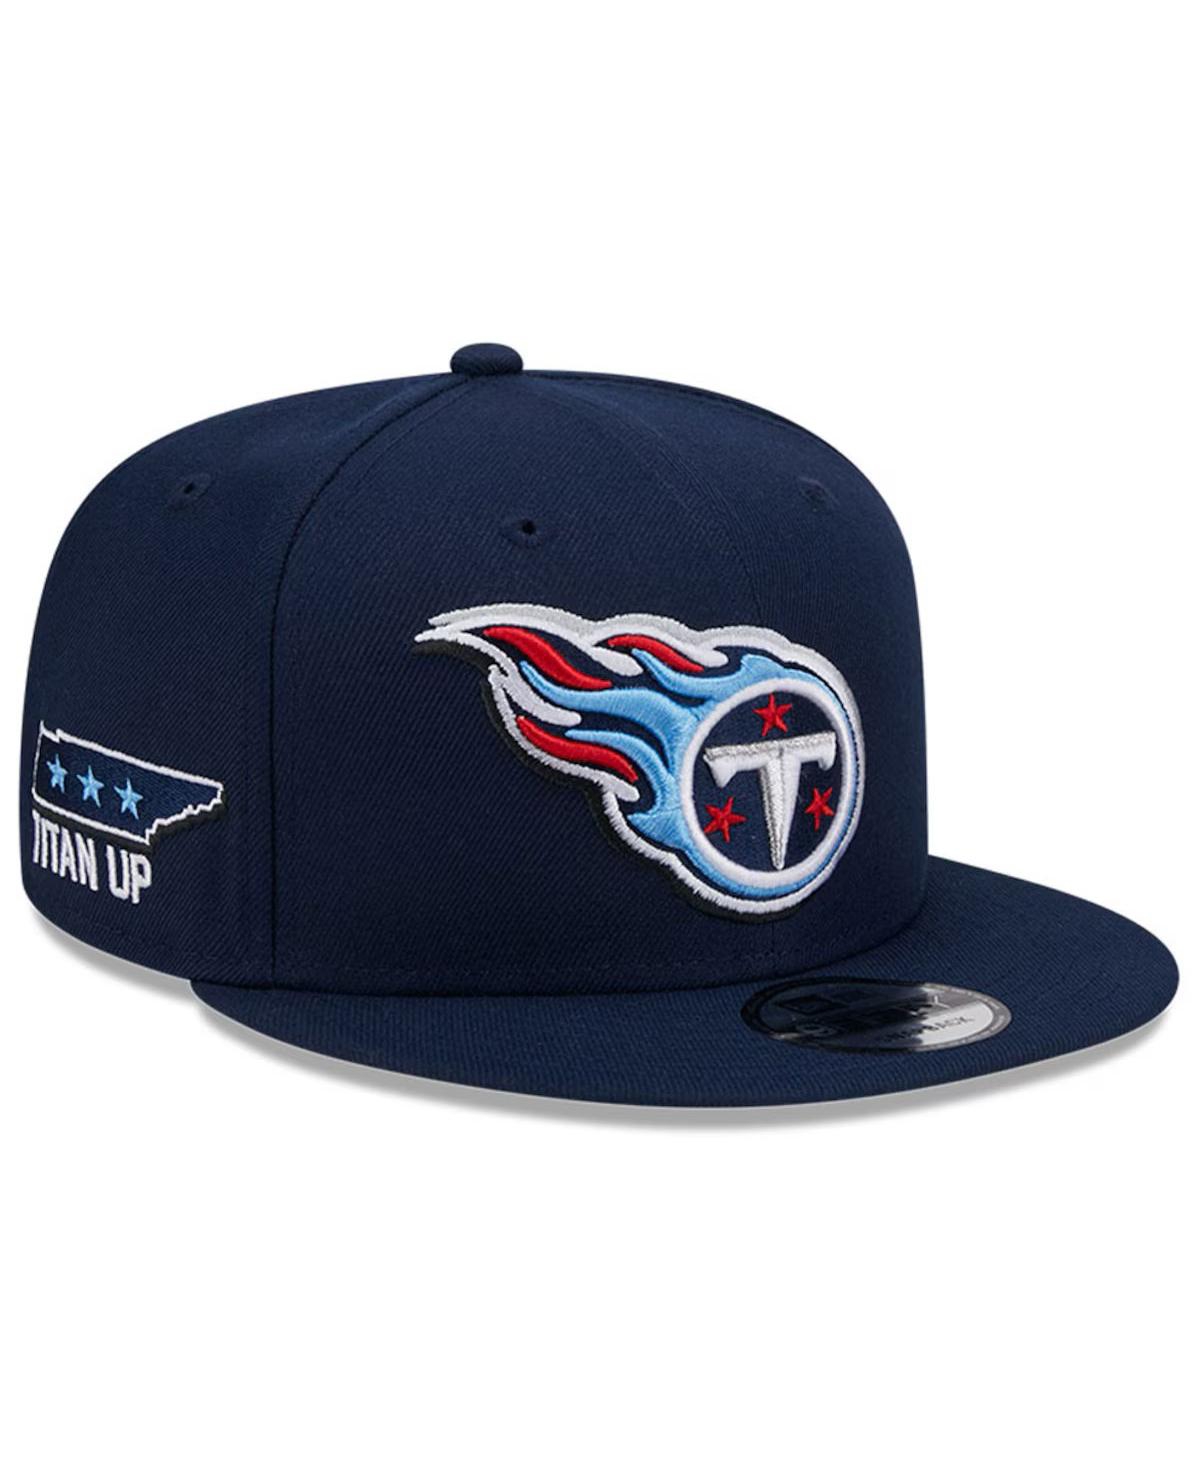 Men's Navy Tennessee Titans 2024 Nfl Draft 9FIFTY Snapback Hat - Navy